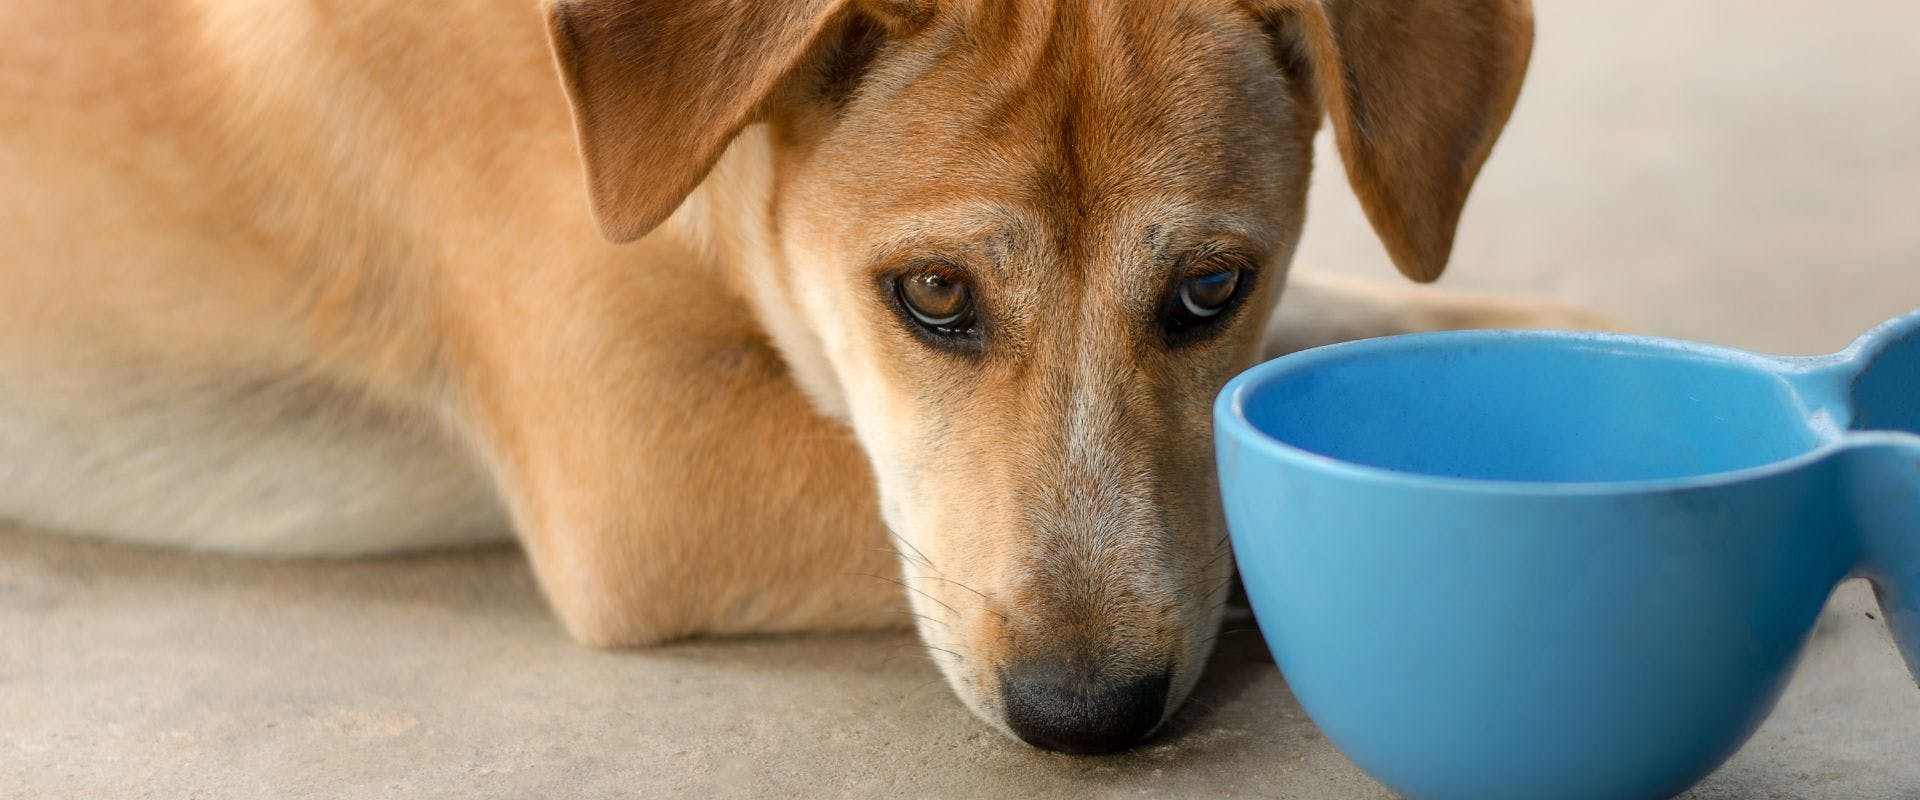 Beige dog waiting by a blue bowl